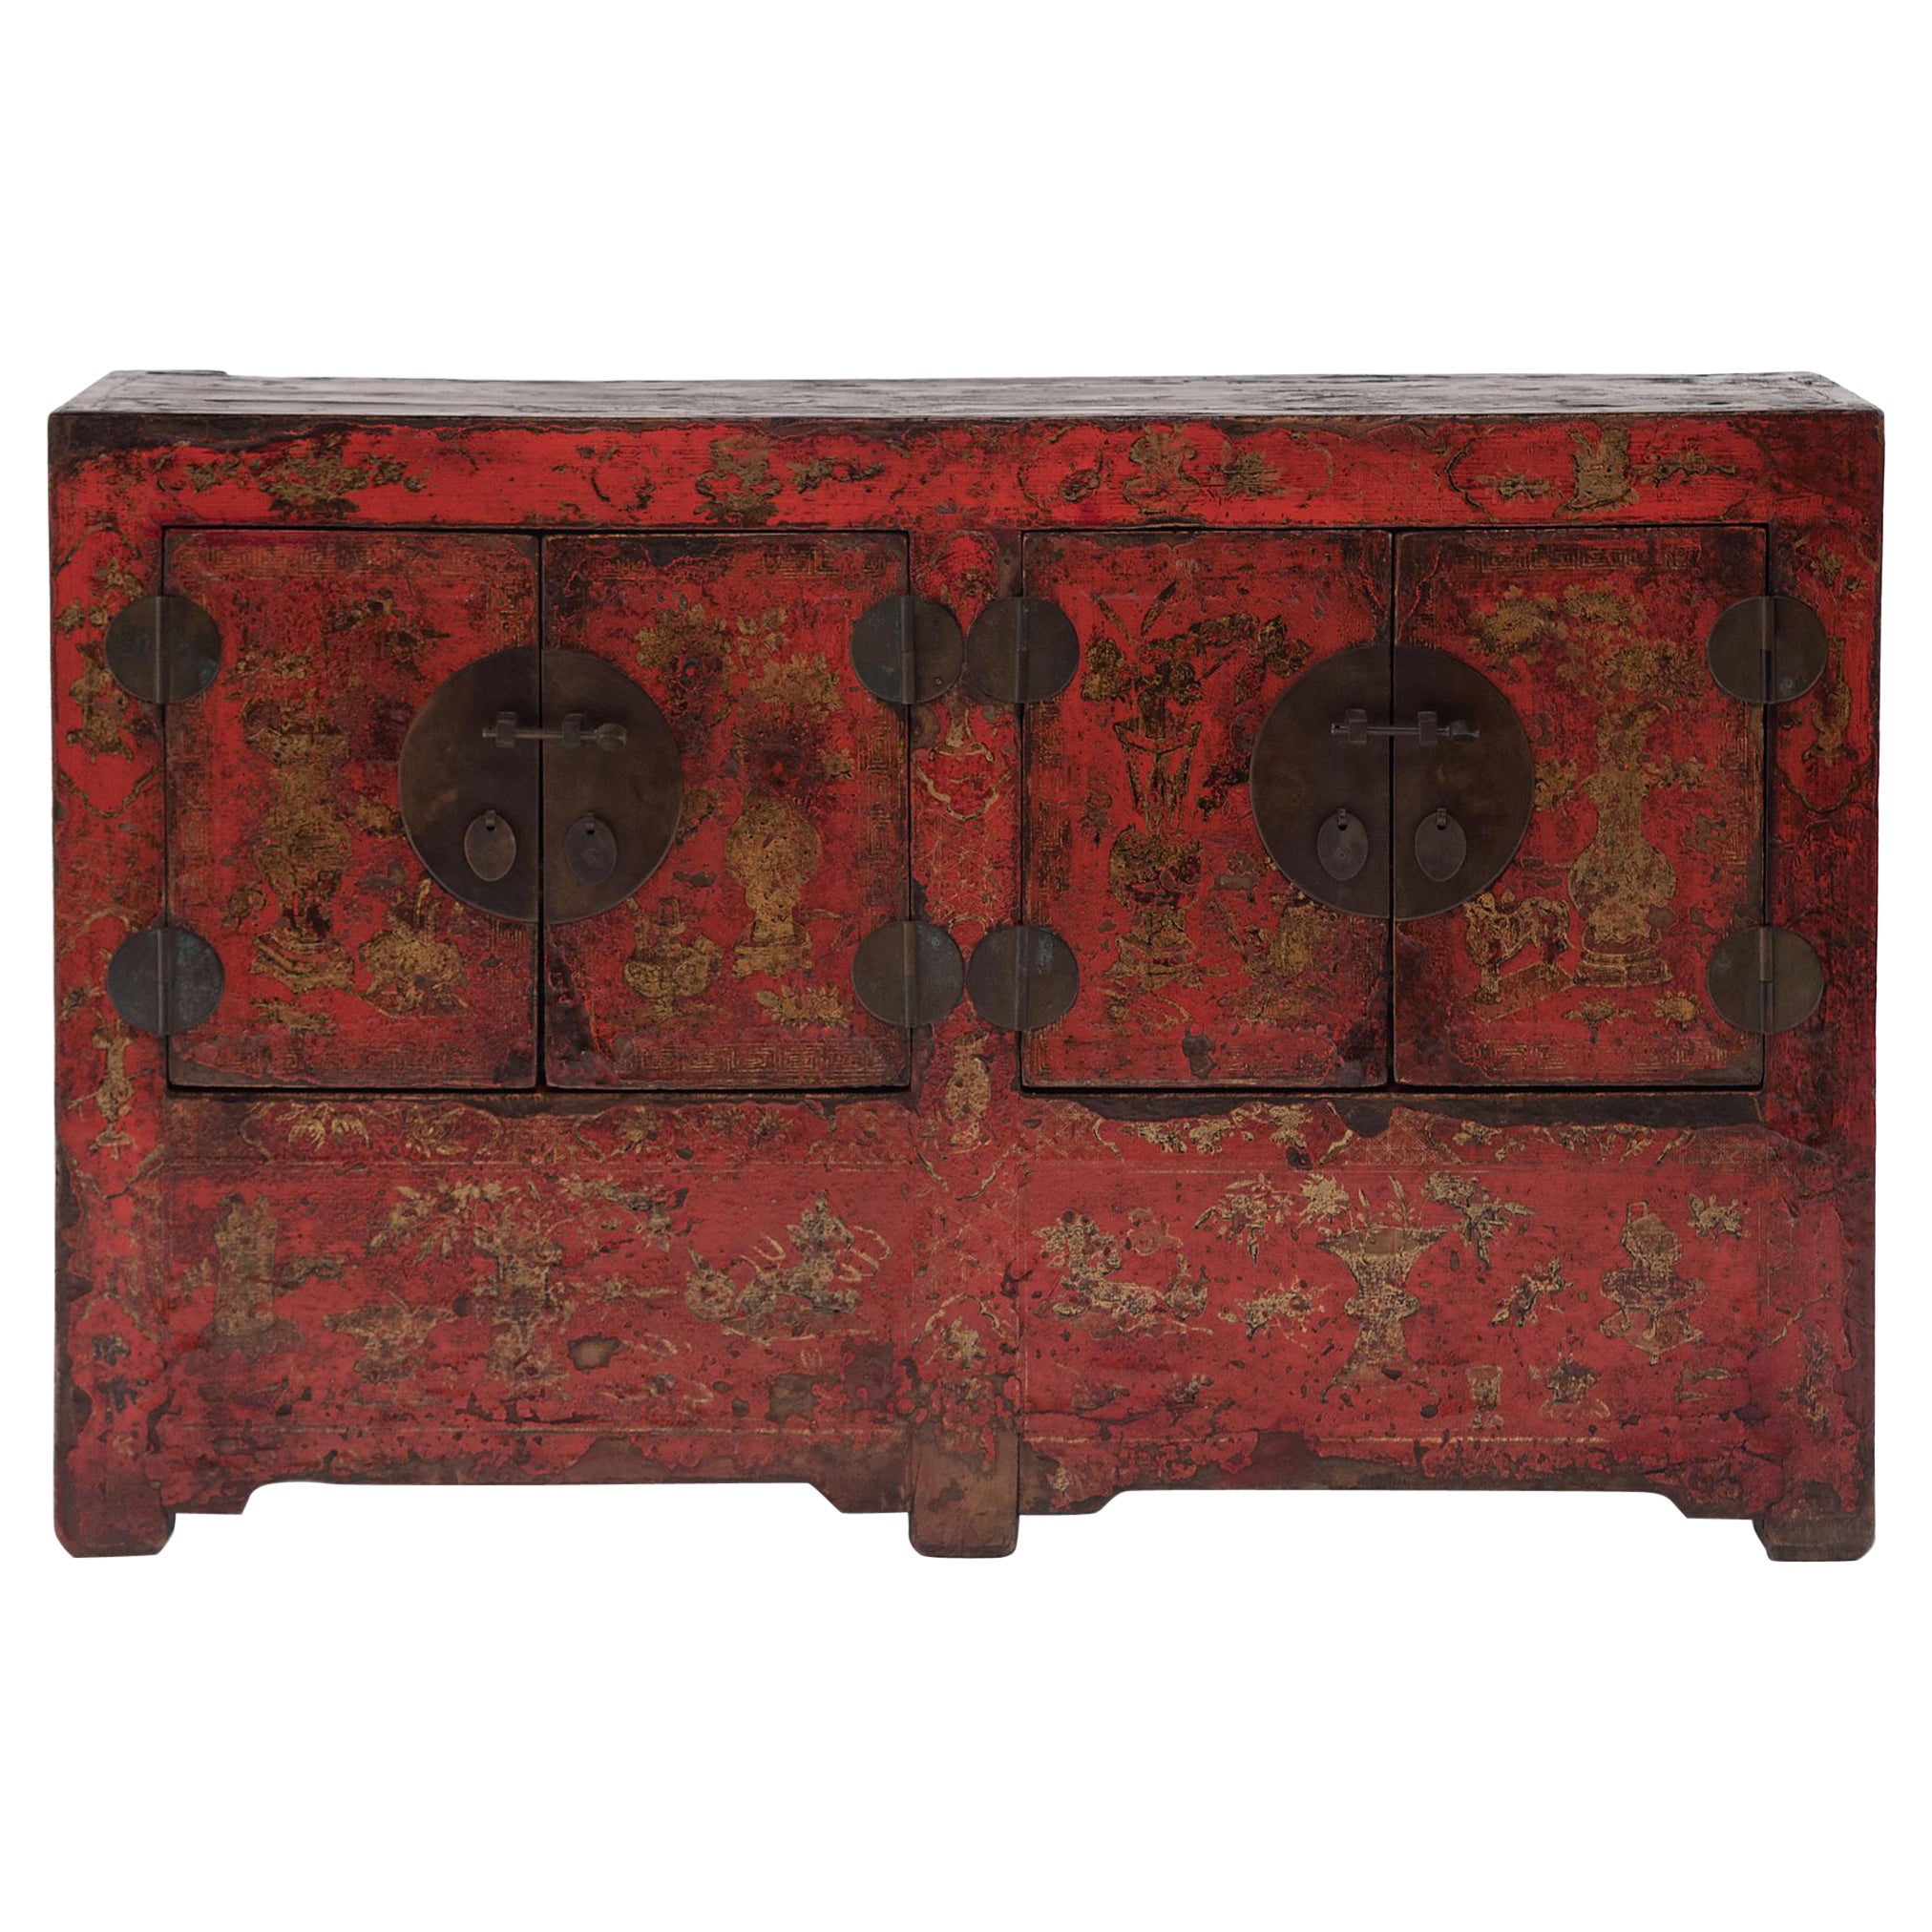 Chinese Gilt Red Lacquer Storage Chest, c. 1850